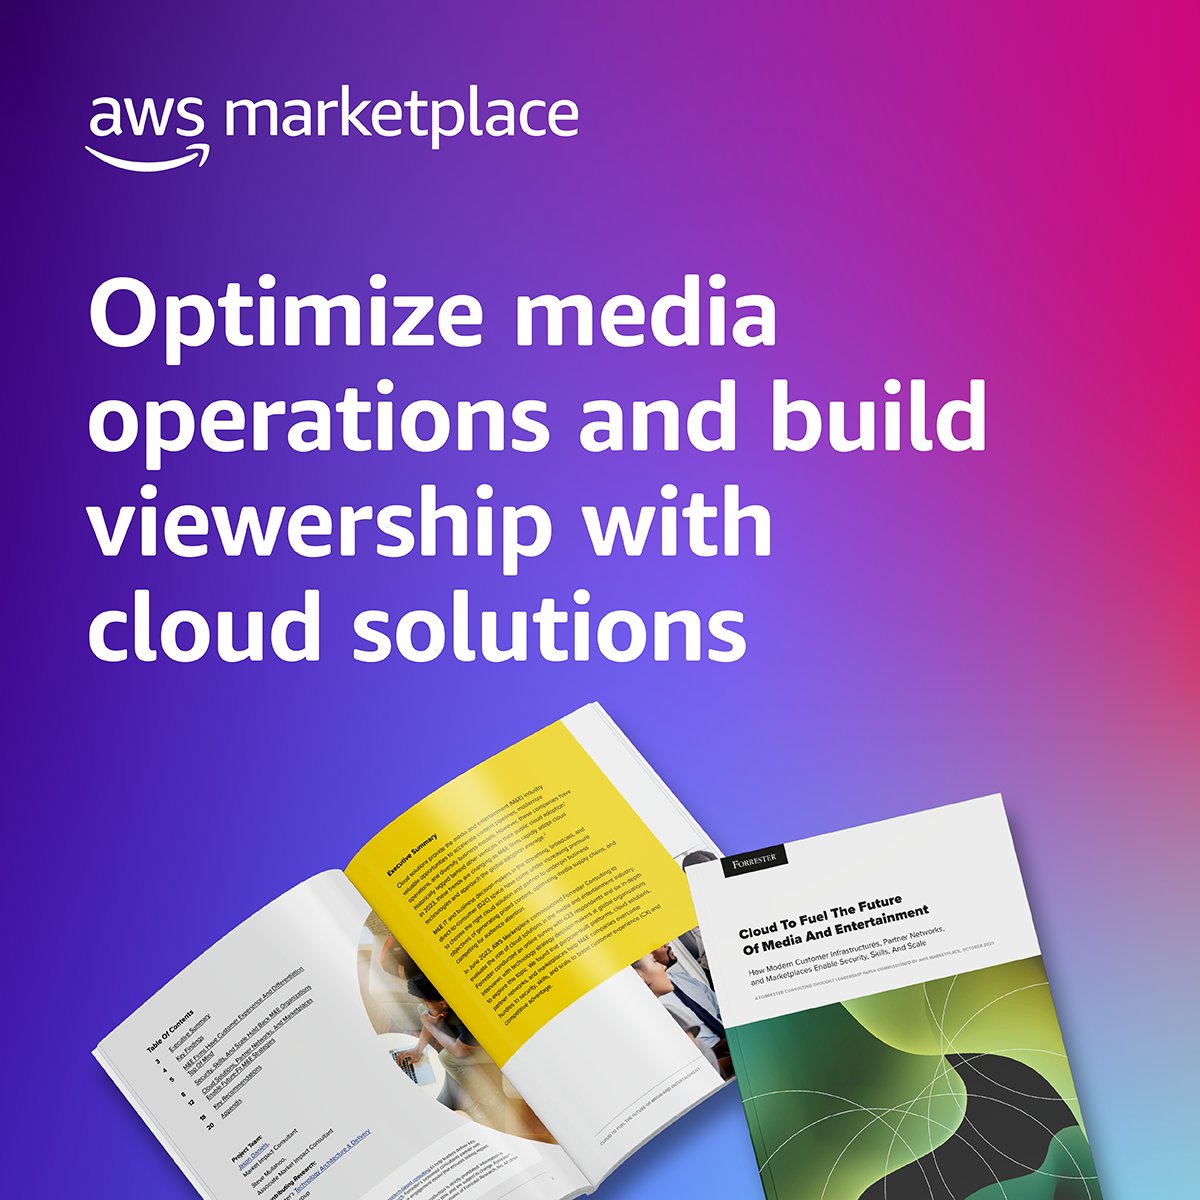 Discover why Media & Entertainment firms worldwide are putting their weight behind the cloud ☁ to modernize technology infrastructure. Download the ebook now: go.aws/3wxvrdY